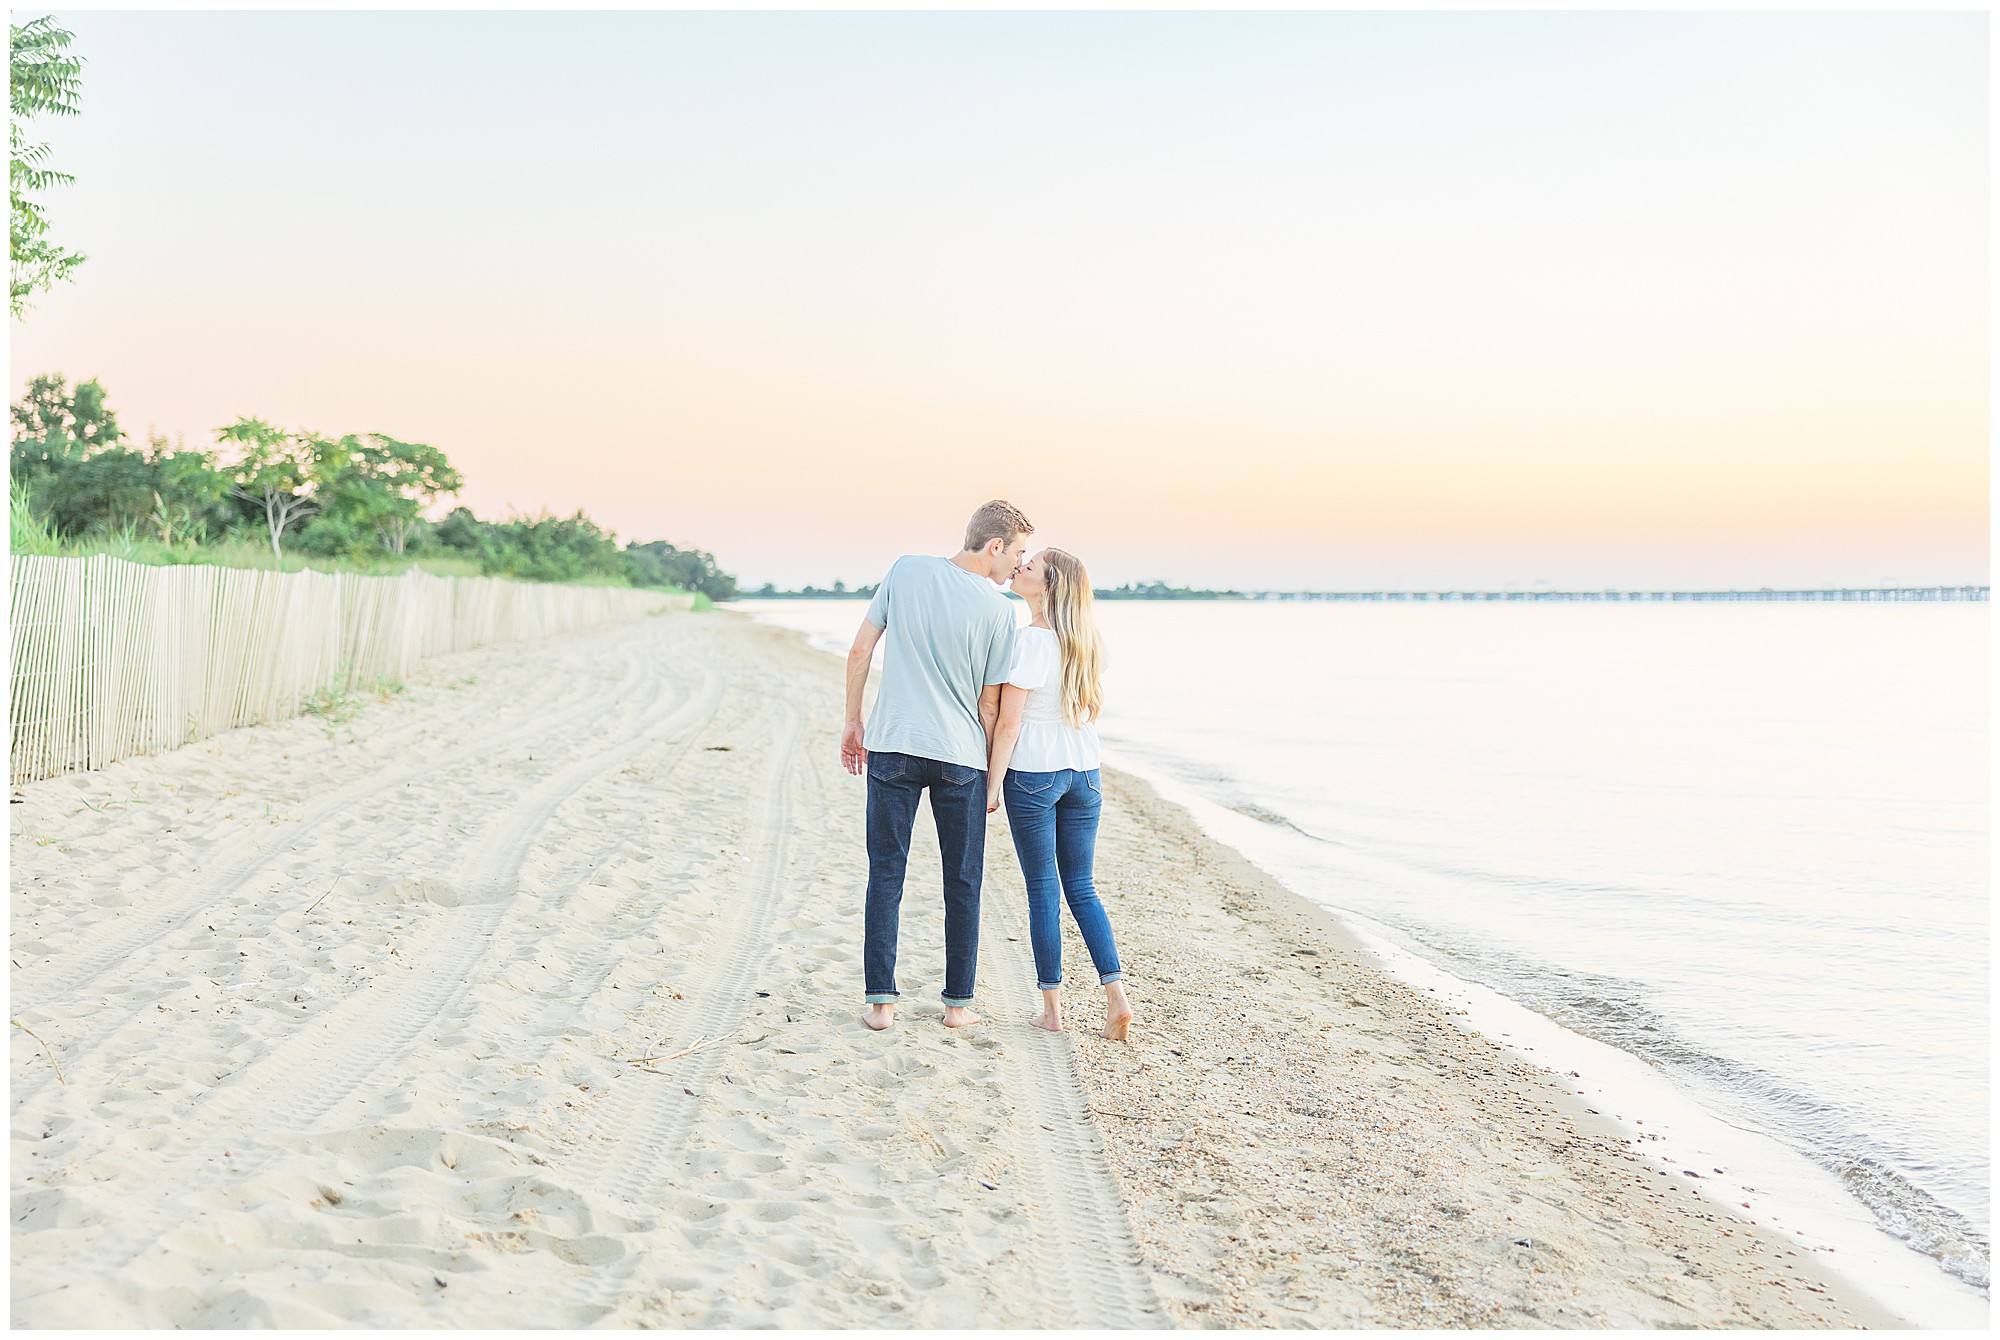 terrapin beach engagement session by baltimore maryland photographer chesapeake charm photography